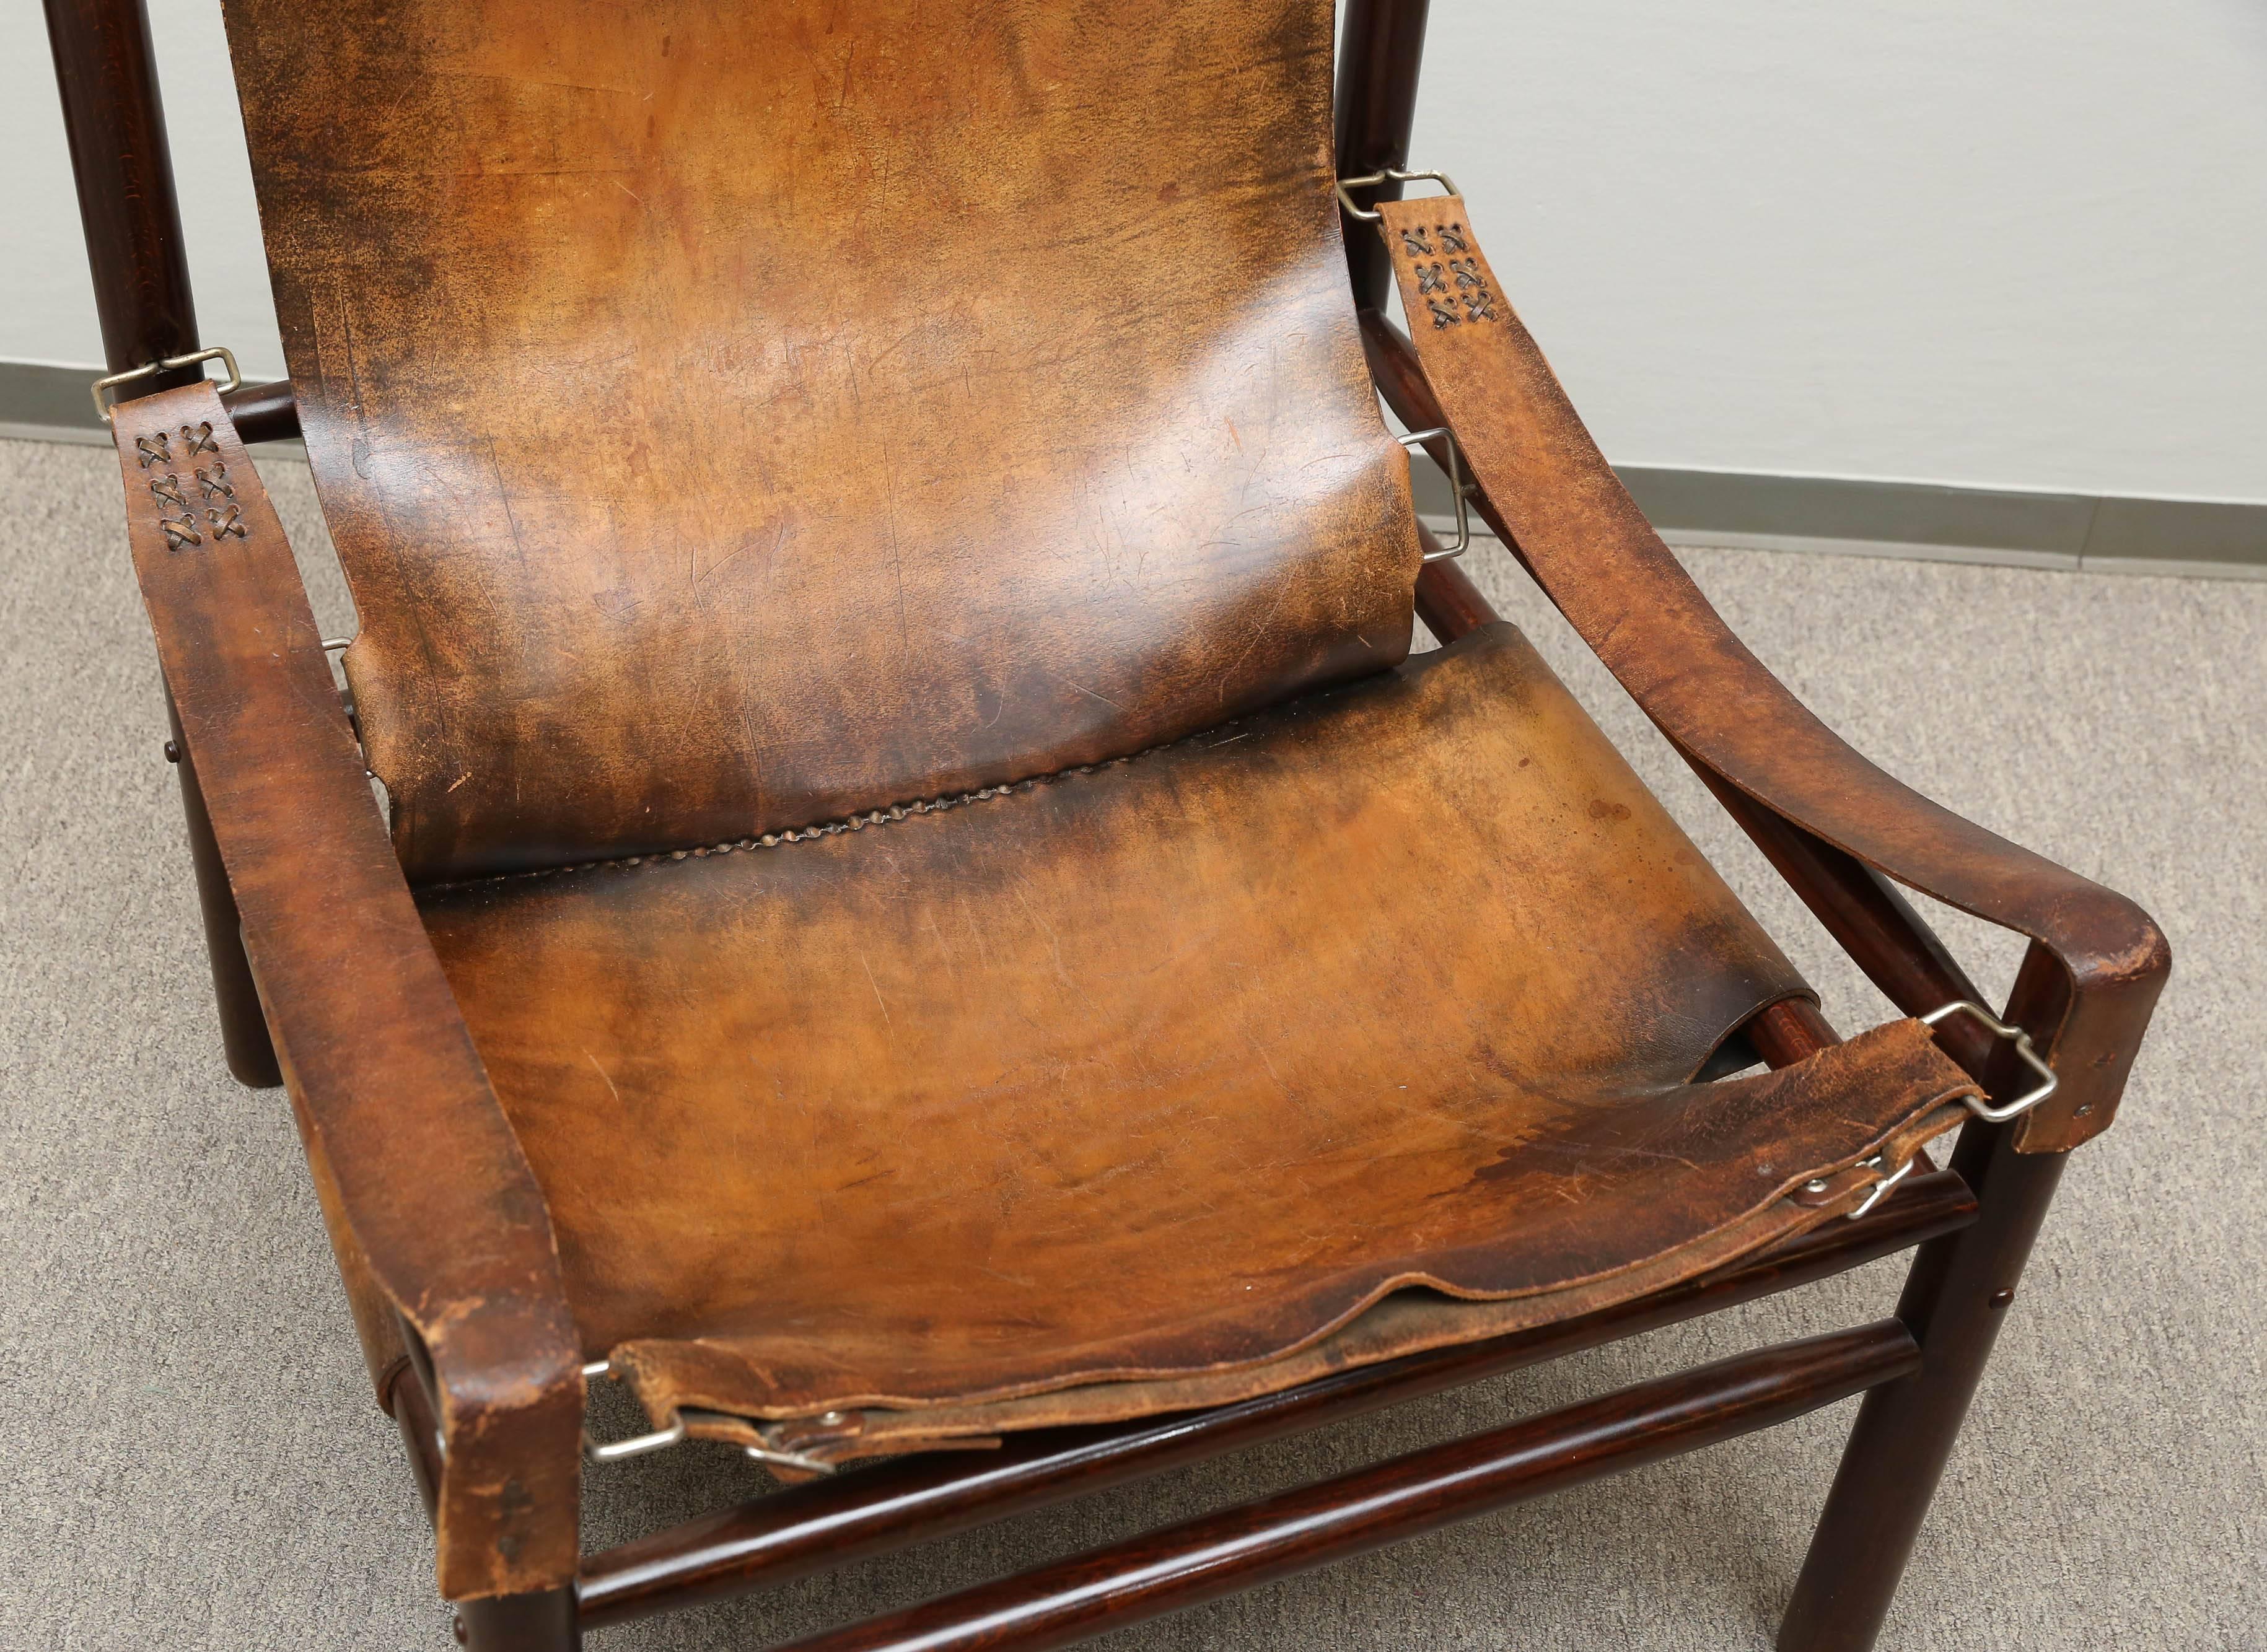 The wooden frame of this chair is attached to the stretched cow hide, that creates a sit and back of the chair. Armrests are created from a thin stripes of leather. 

Hungary, circa 1940s.

Measures: 28” x 28” x 32”.